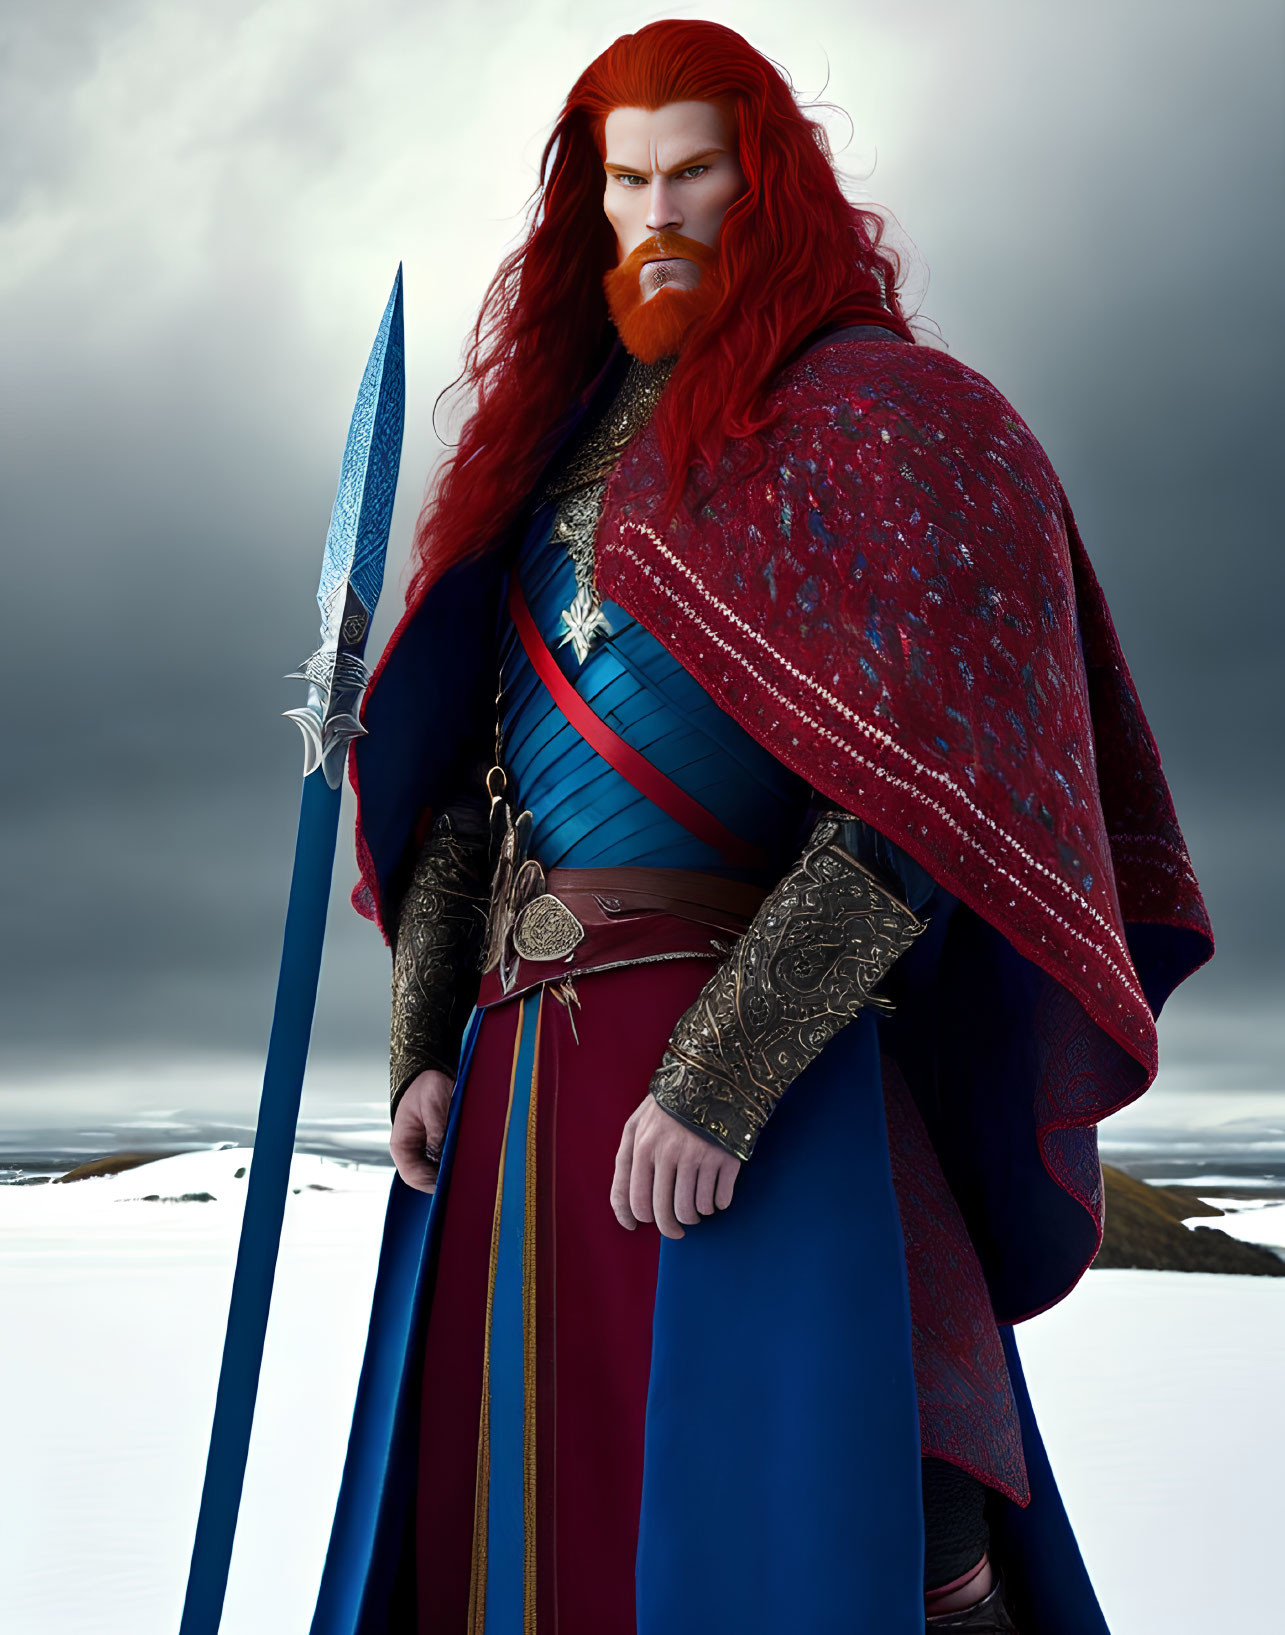 Red-Haired Warrior in Ornate Armor Stands in Snowy Landscape